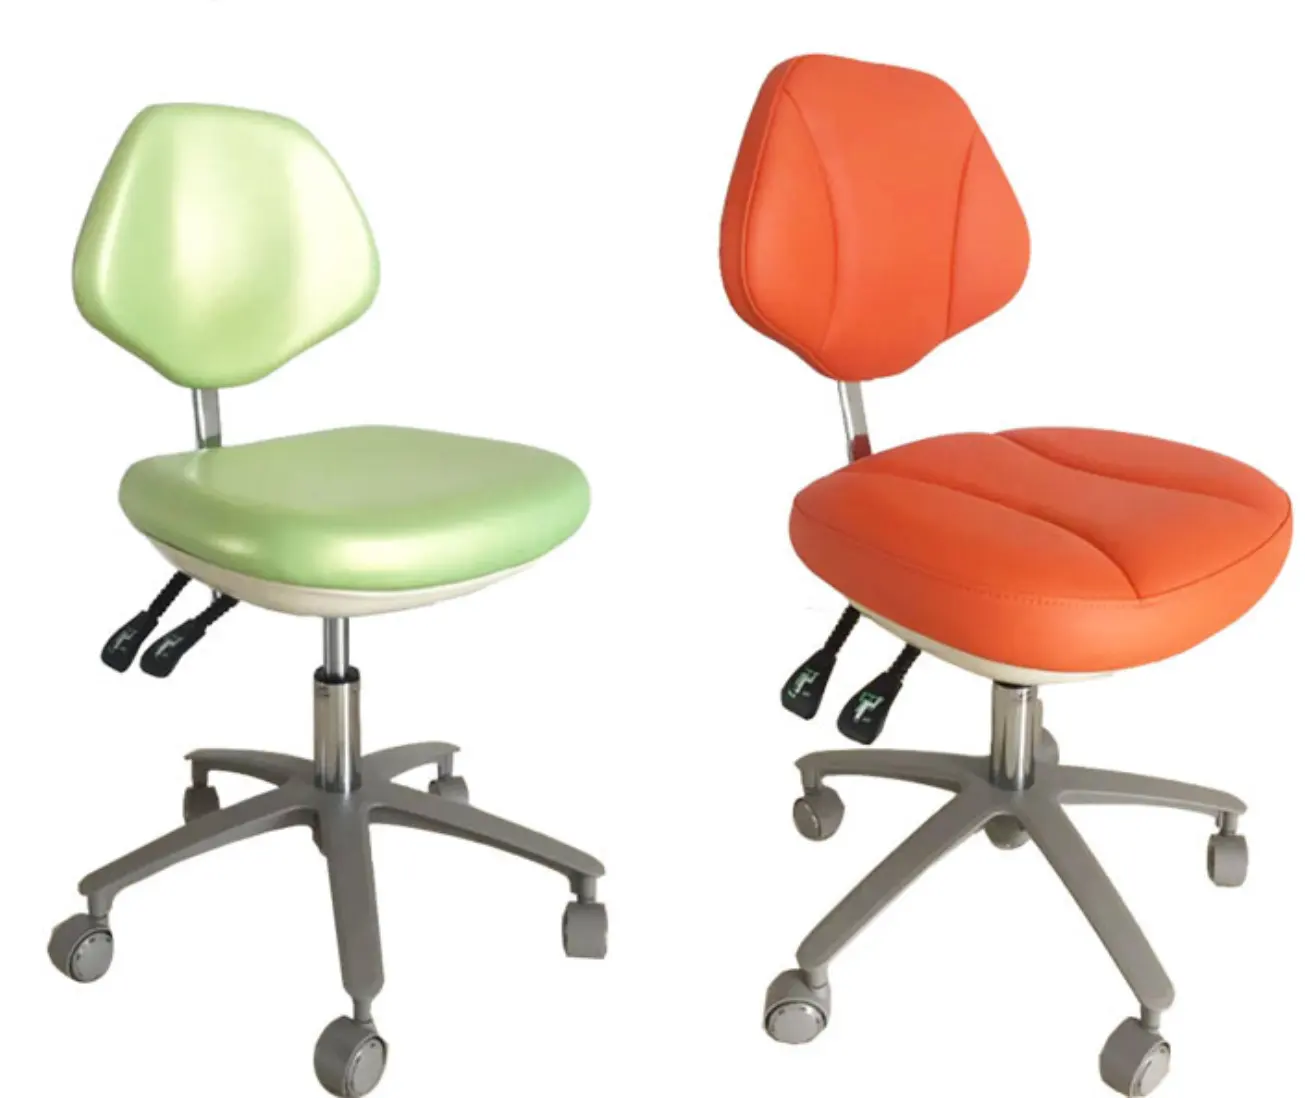 AliGan dental equipment for stool dental doctor chair with backrest for dentist and assistants stool comfortable